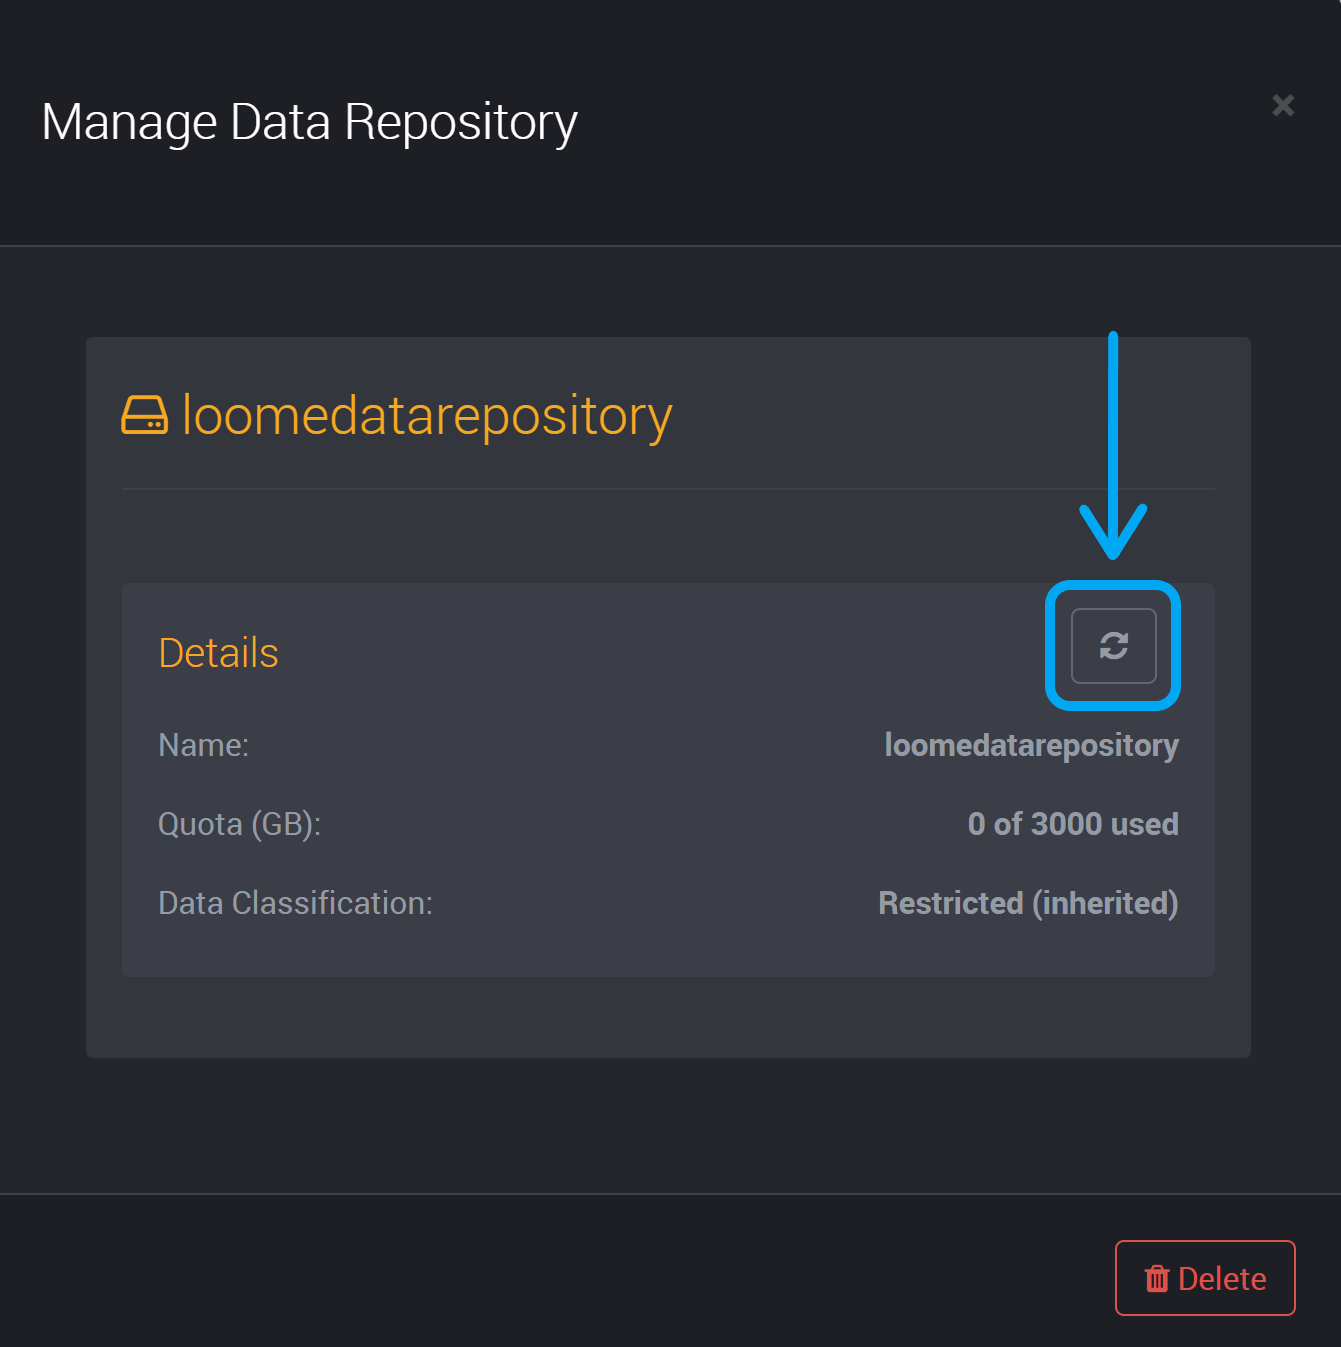 Refresh the details of this data repository